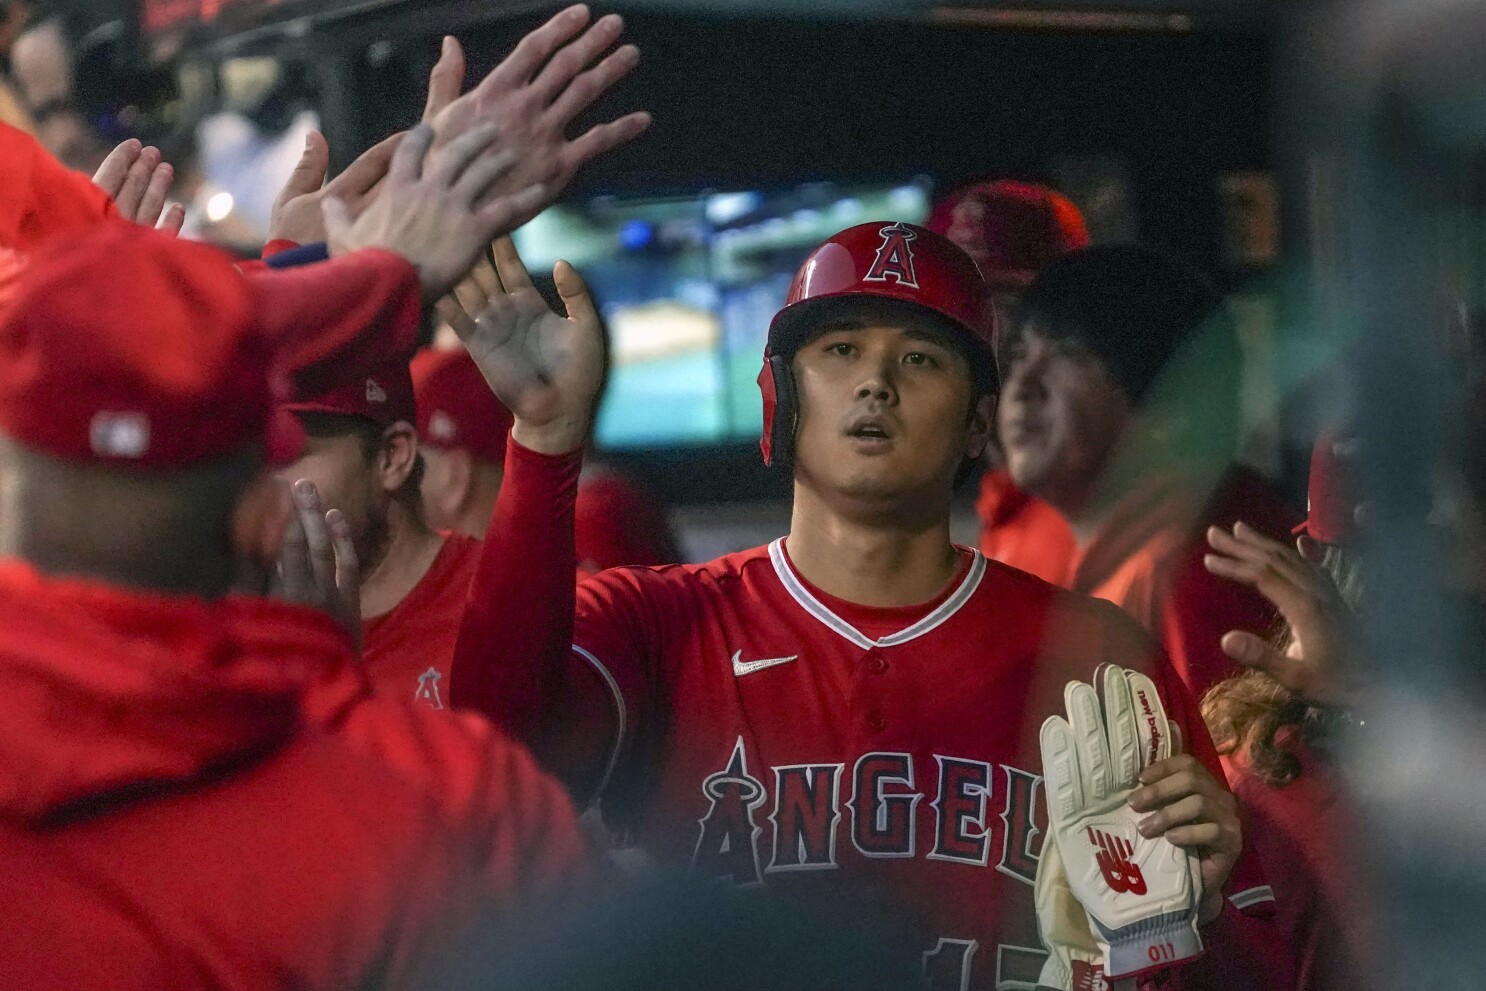 Los Angeles Angels on X: Fans can purchase this jersey and cap